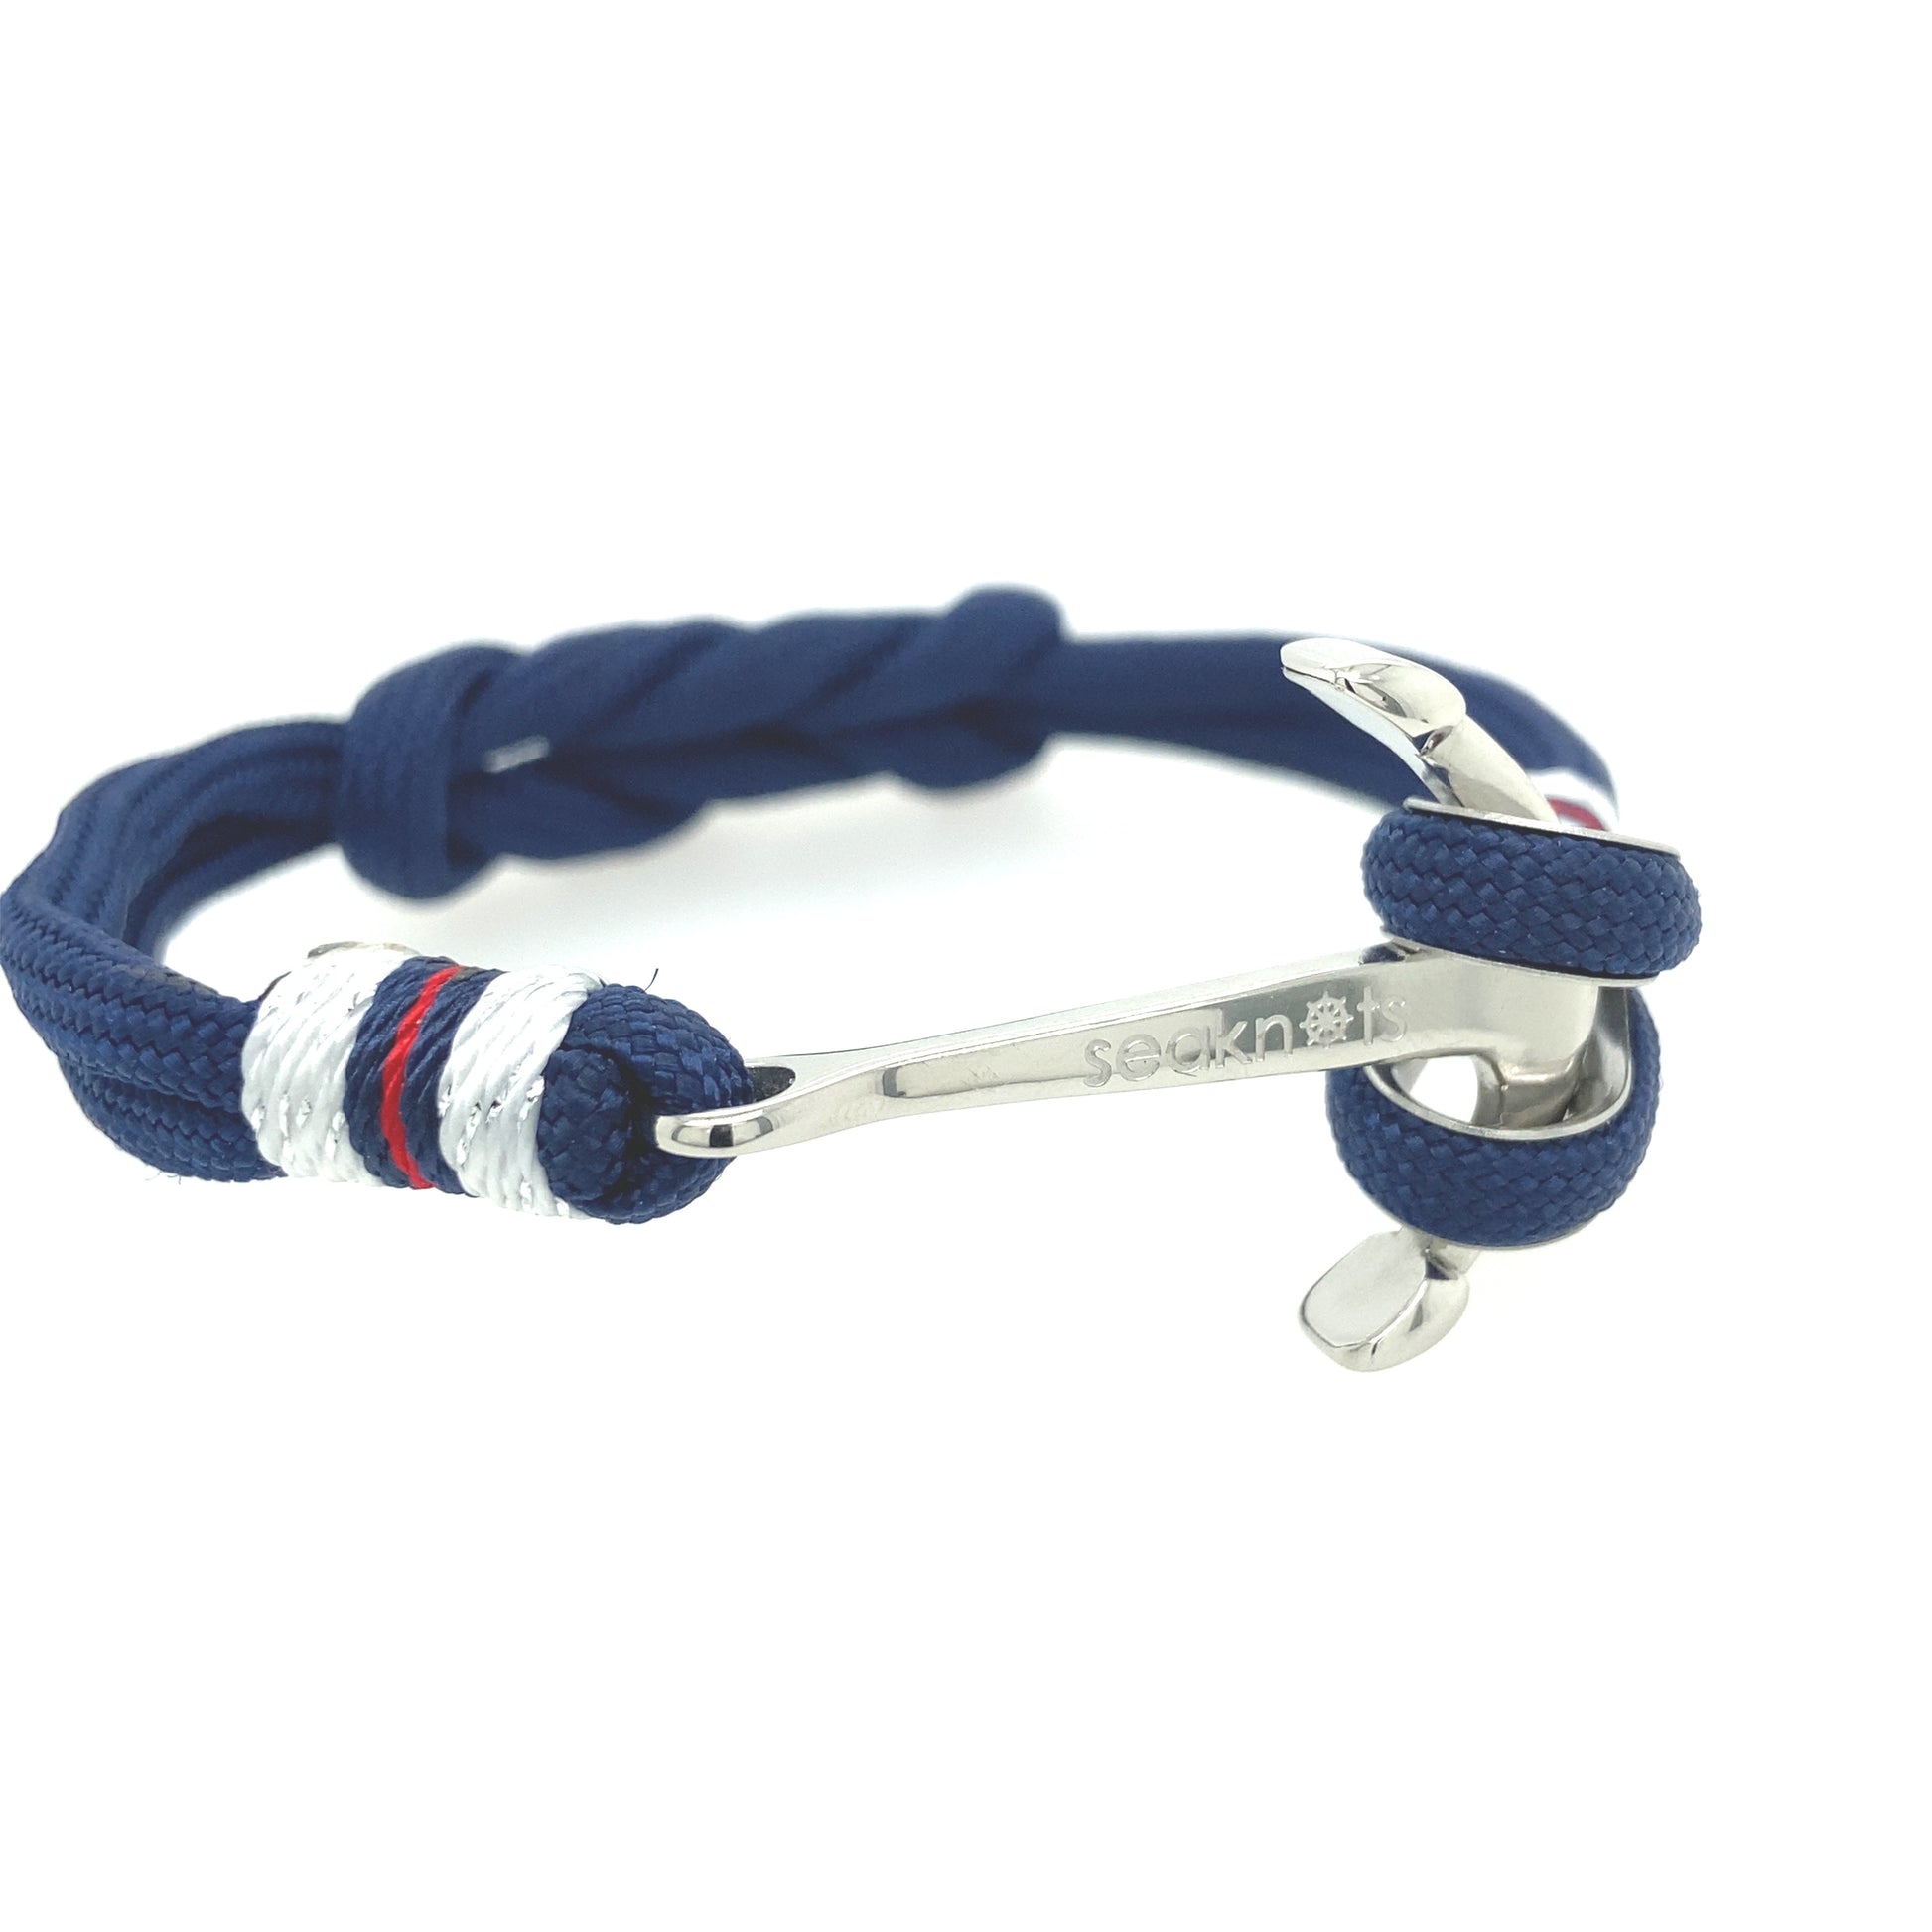 Double Cord with Silver Anchor Bracelet | Seaknots | Luby 